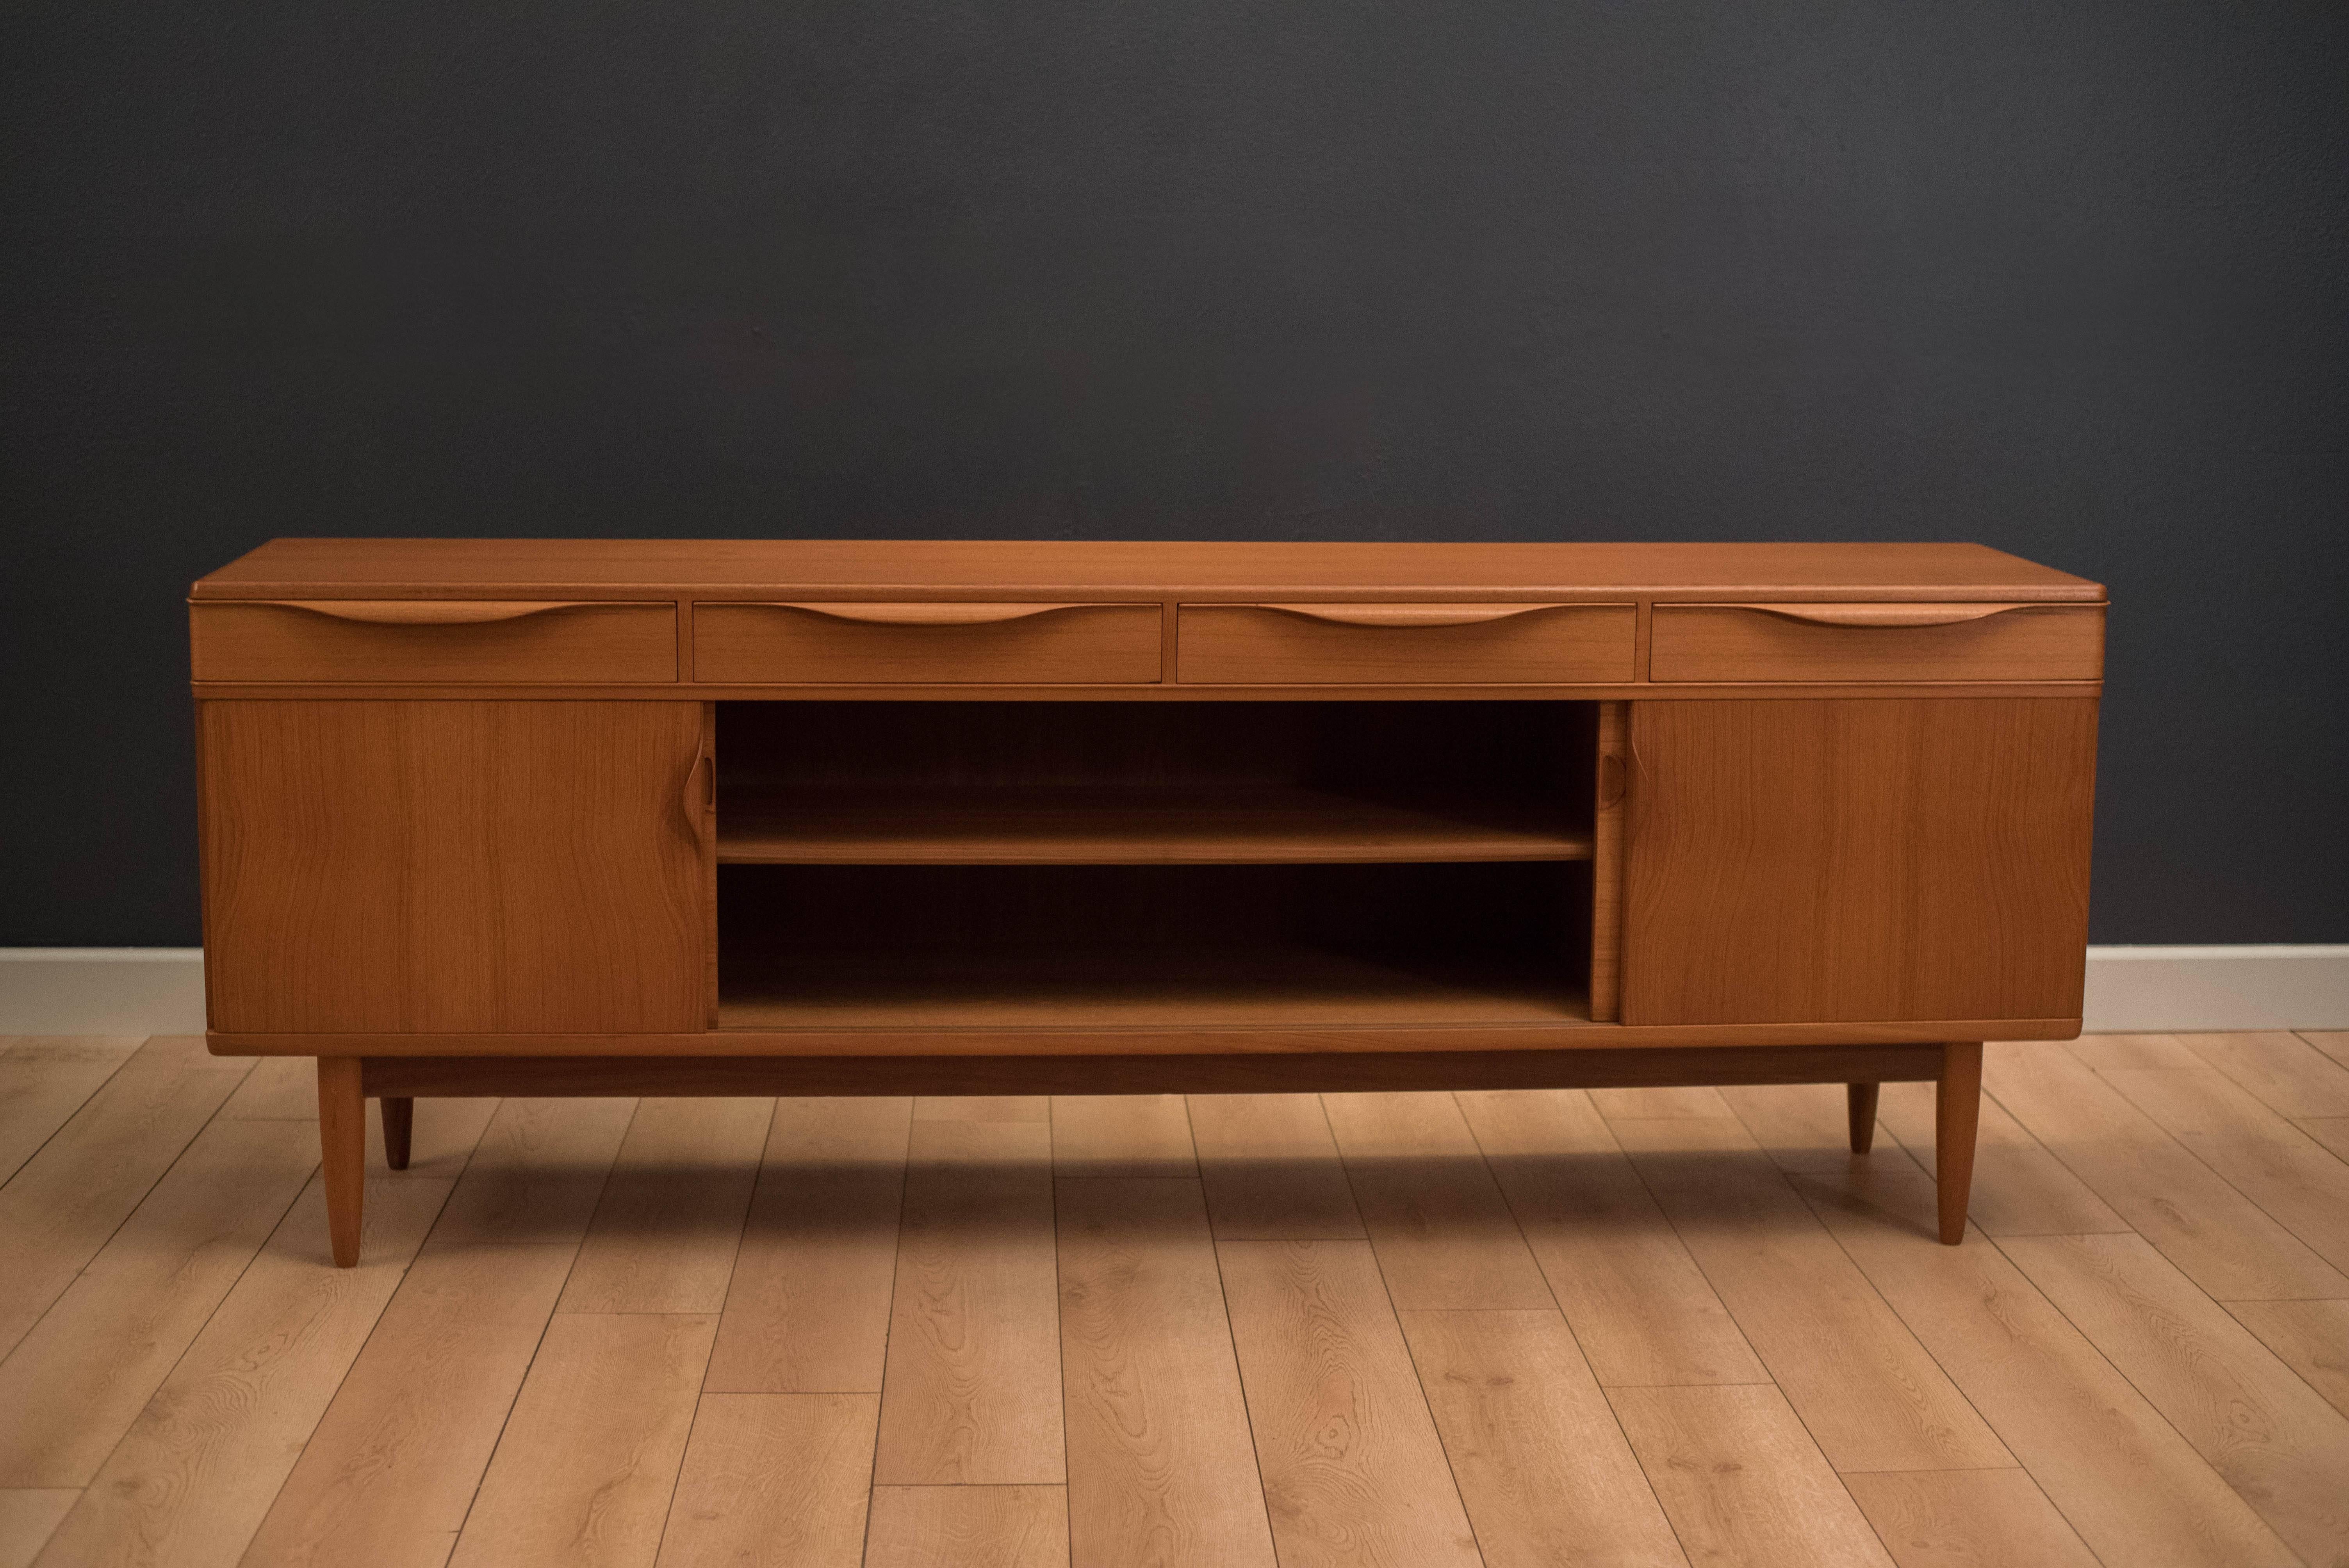 Mid-Century Modern credenza in teak manufactured by Bramin. This statement piece features unique curved corner edging and four dovetailed drawers with sculpted wood handles. Equipped with sliding doors that contain open storage space with adjustable